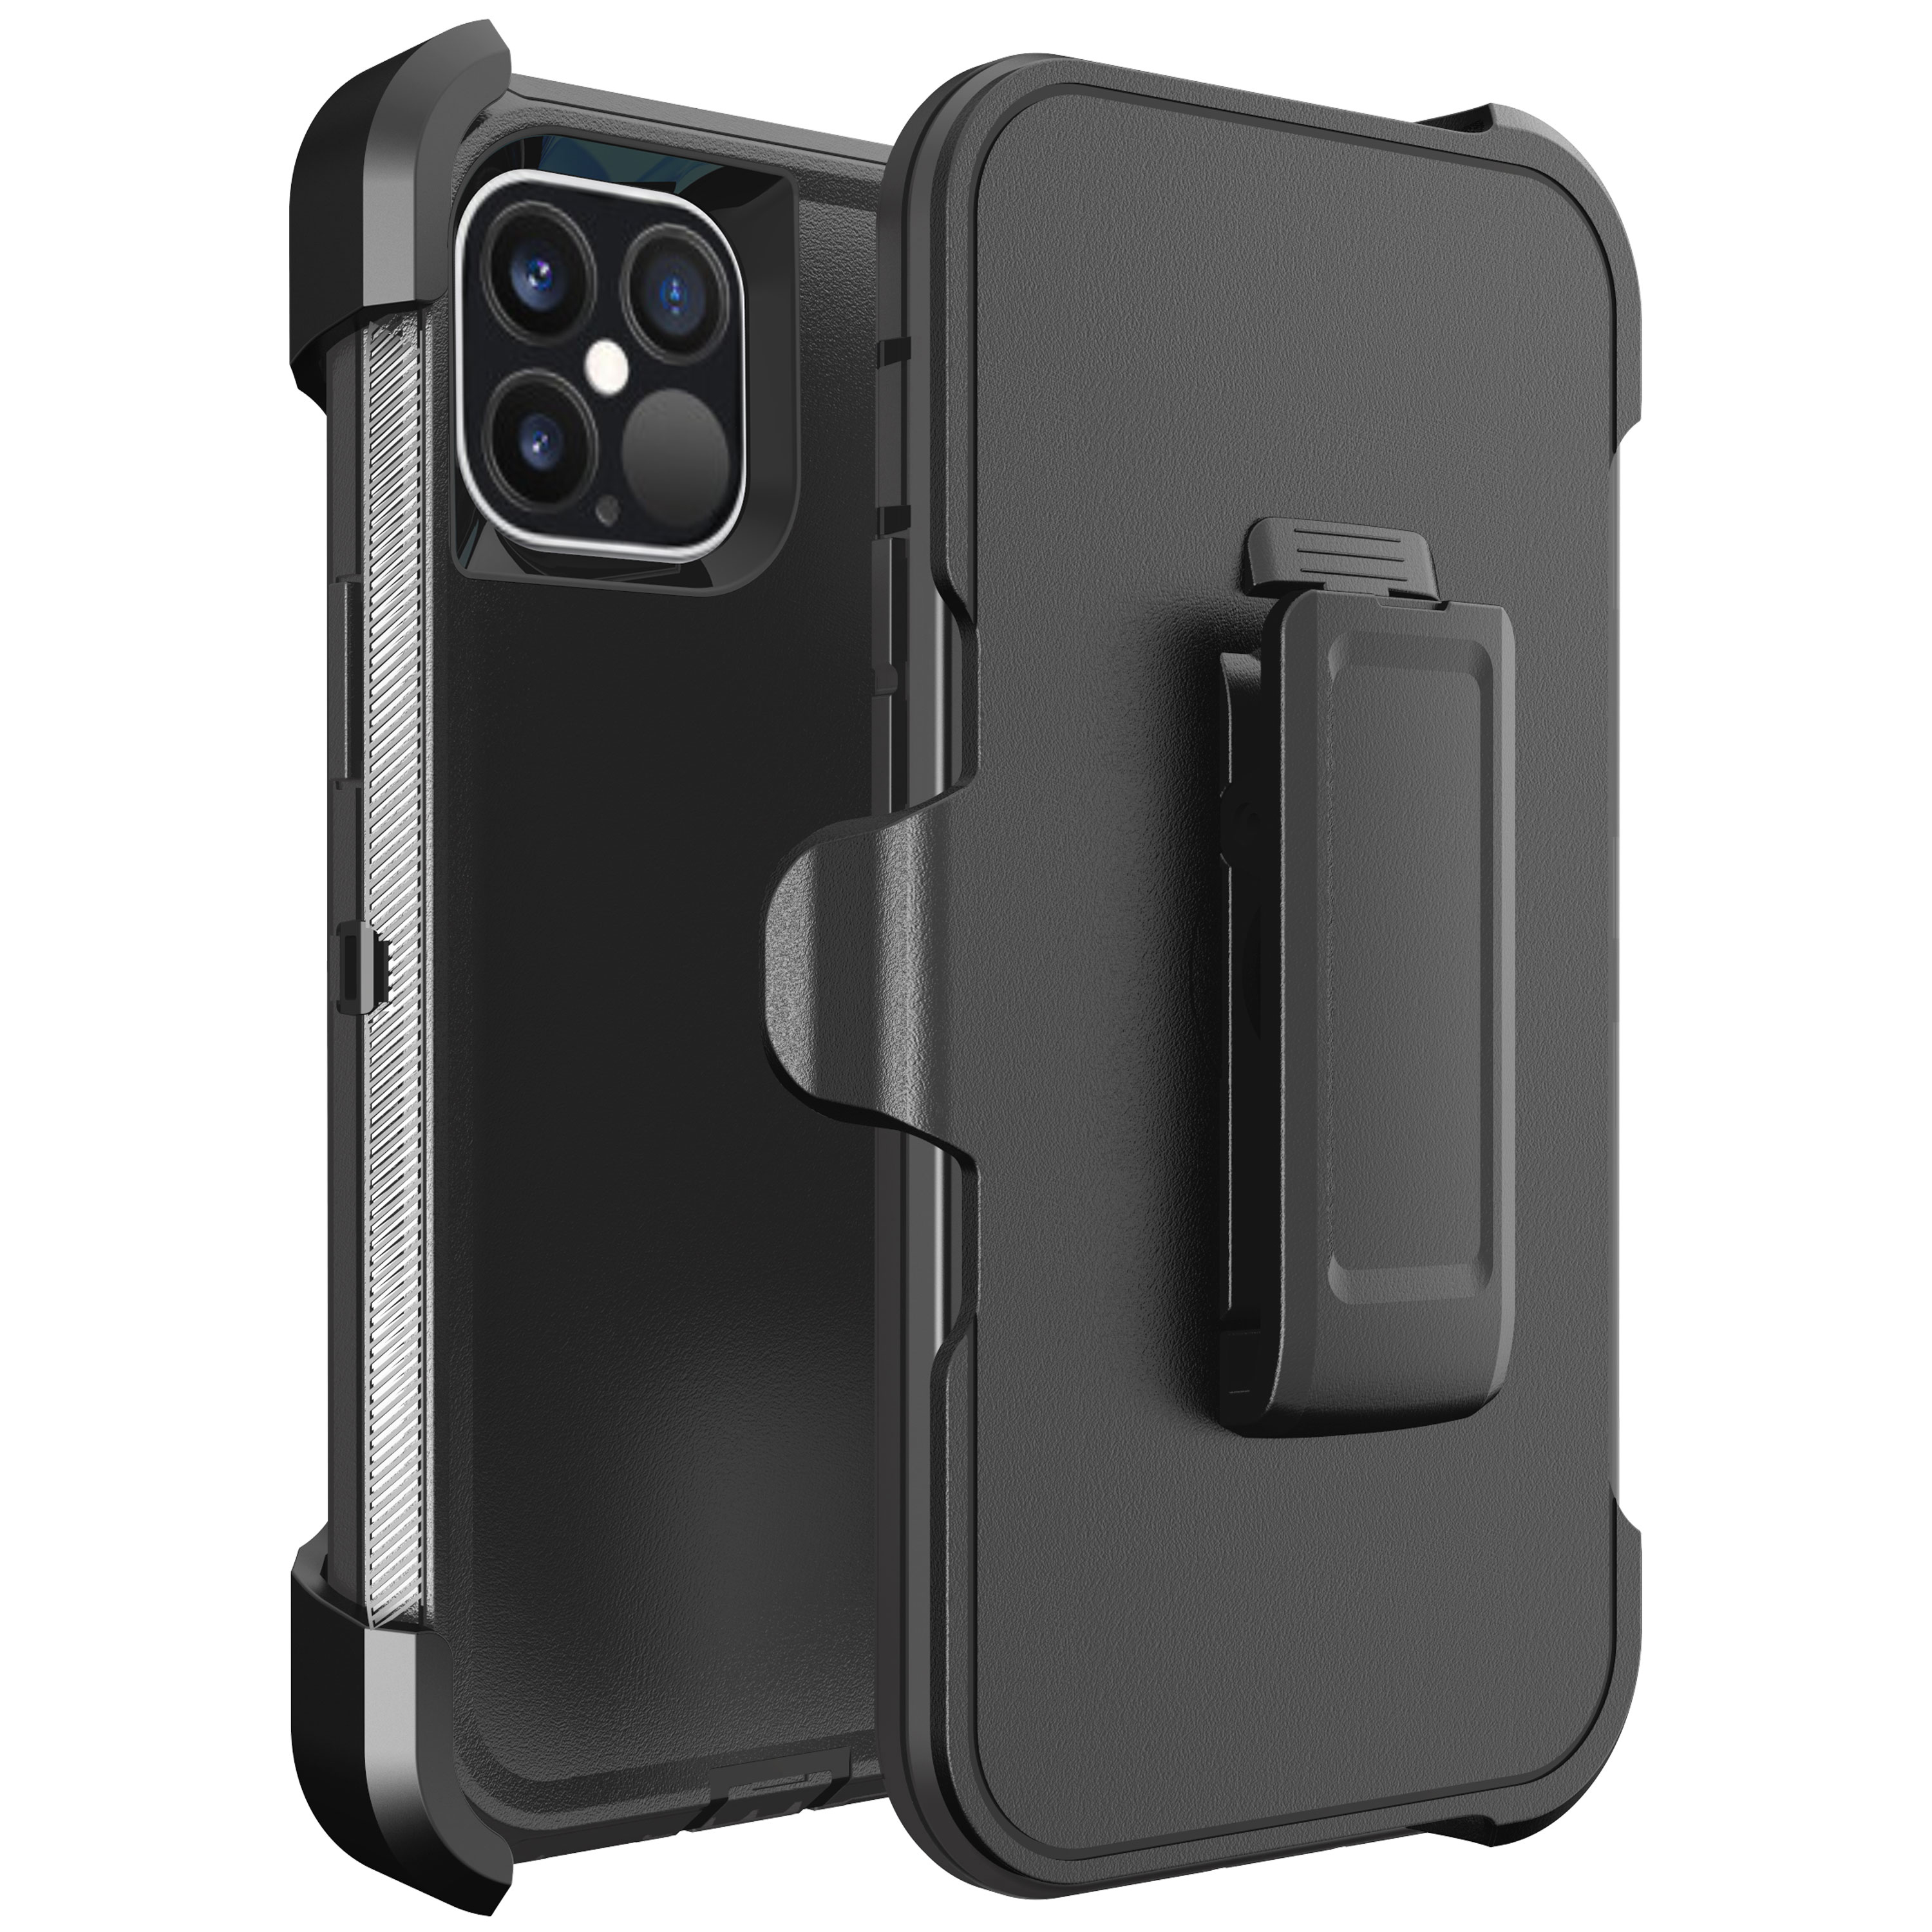 Armor Robot Case With Clip for iPHONE 12 / 12 Pro 6.1 (Black)